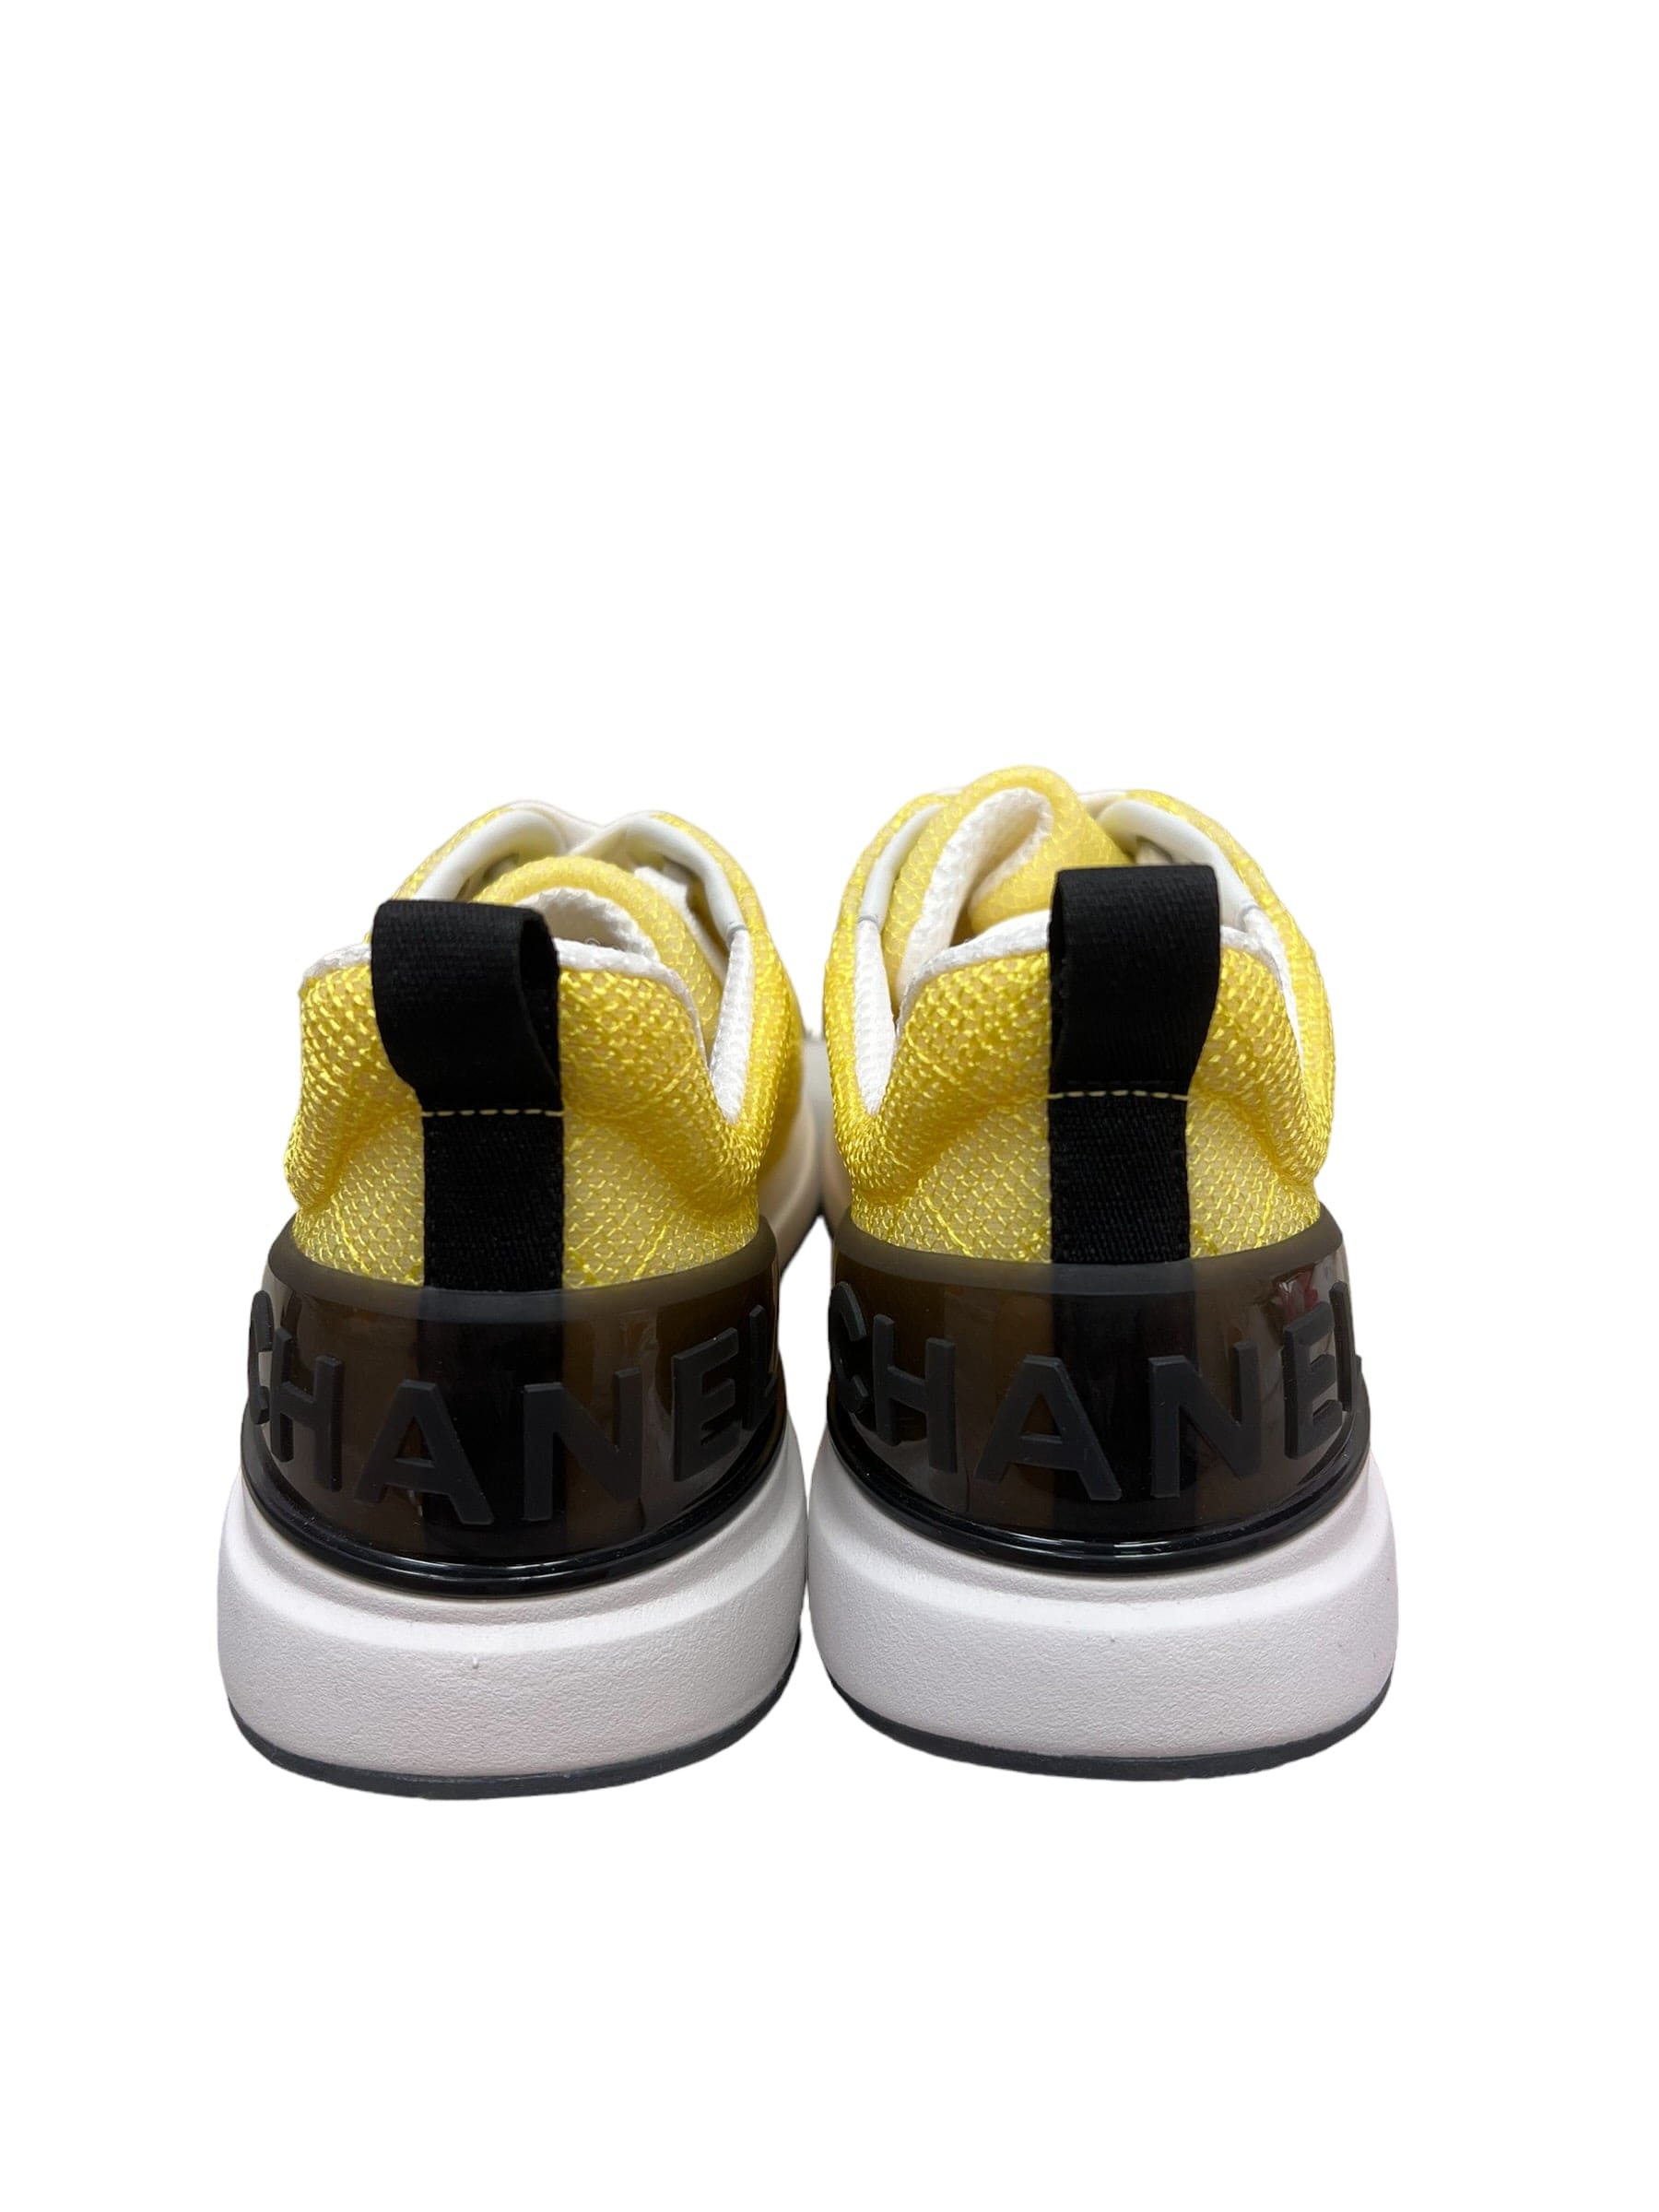 Chanel Trainers - Yellow Mesh Size 37 SKC1670